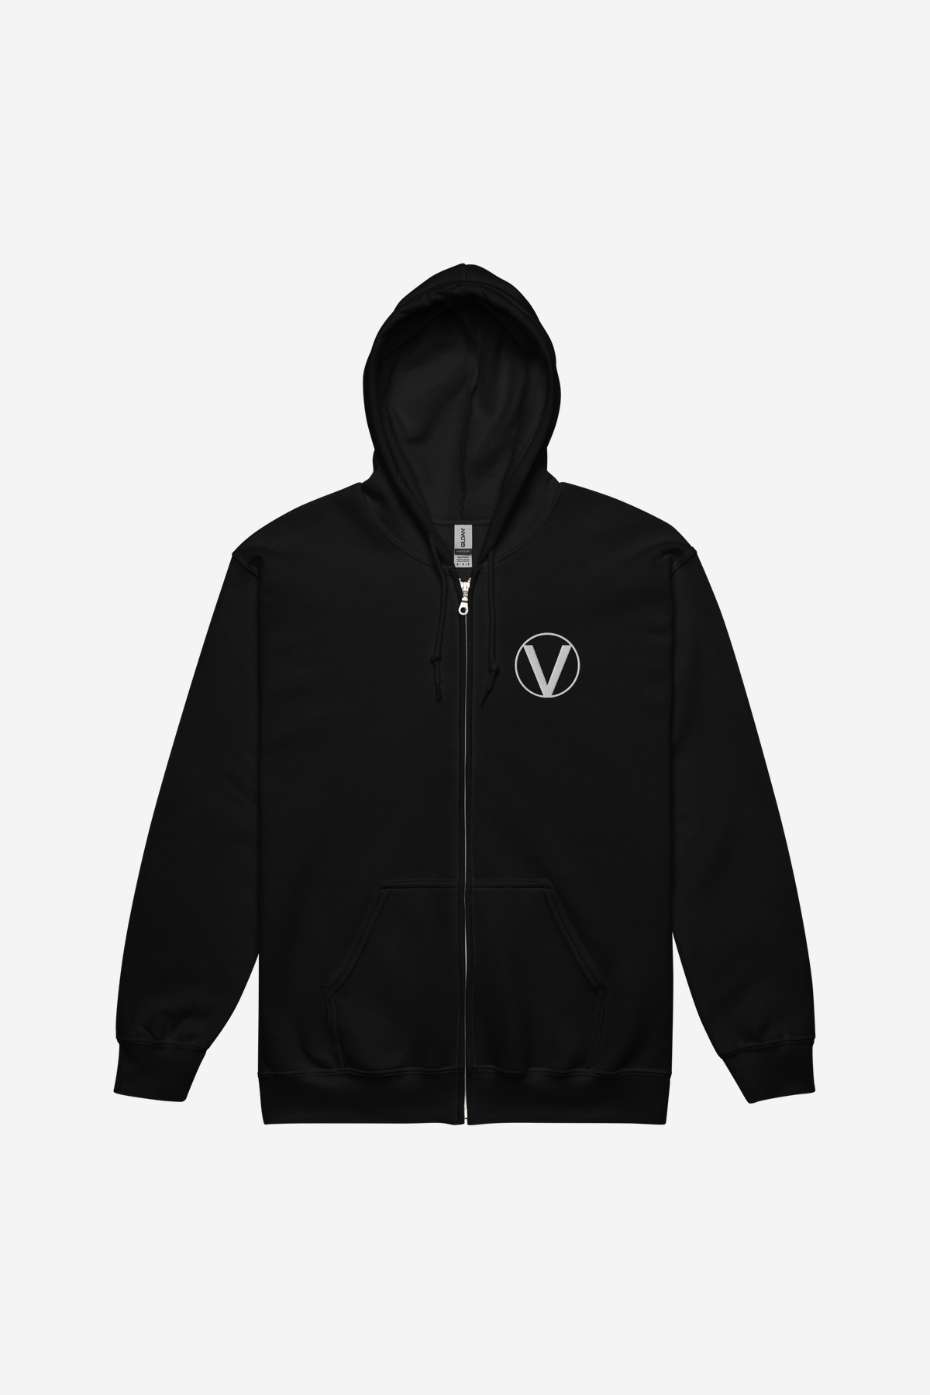 V Symbol Unisex zip hoodie - Embroidery – Plant Babes